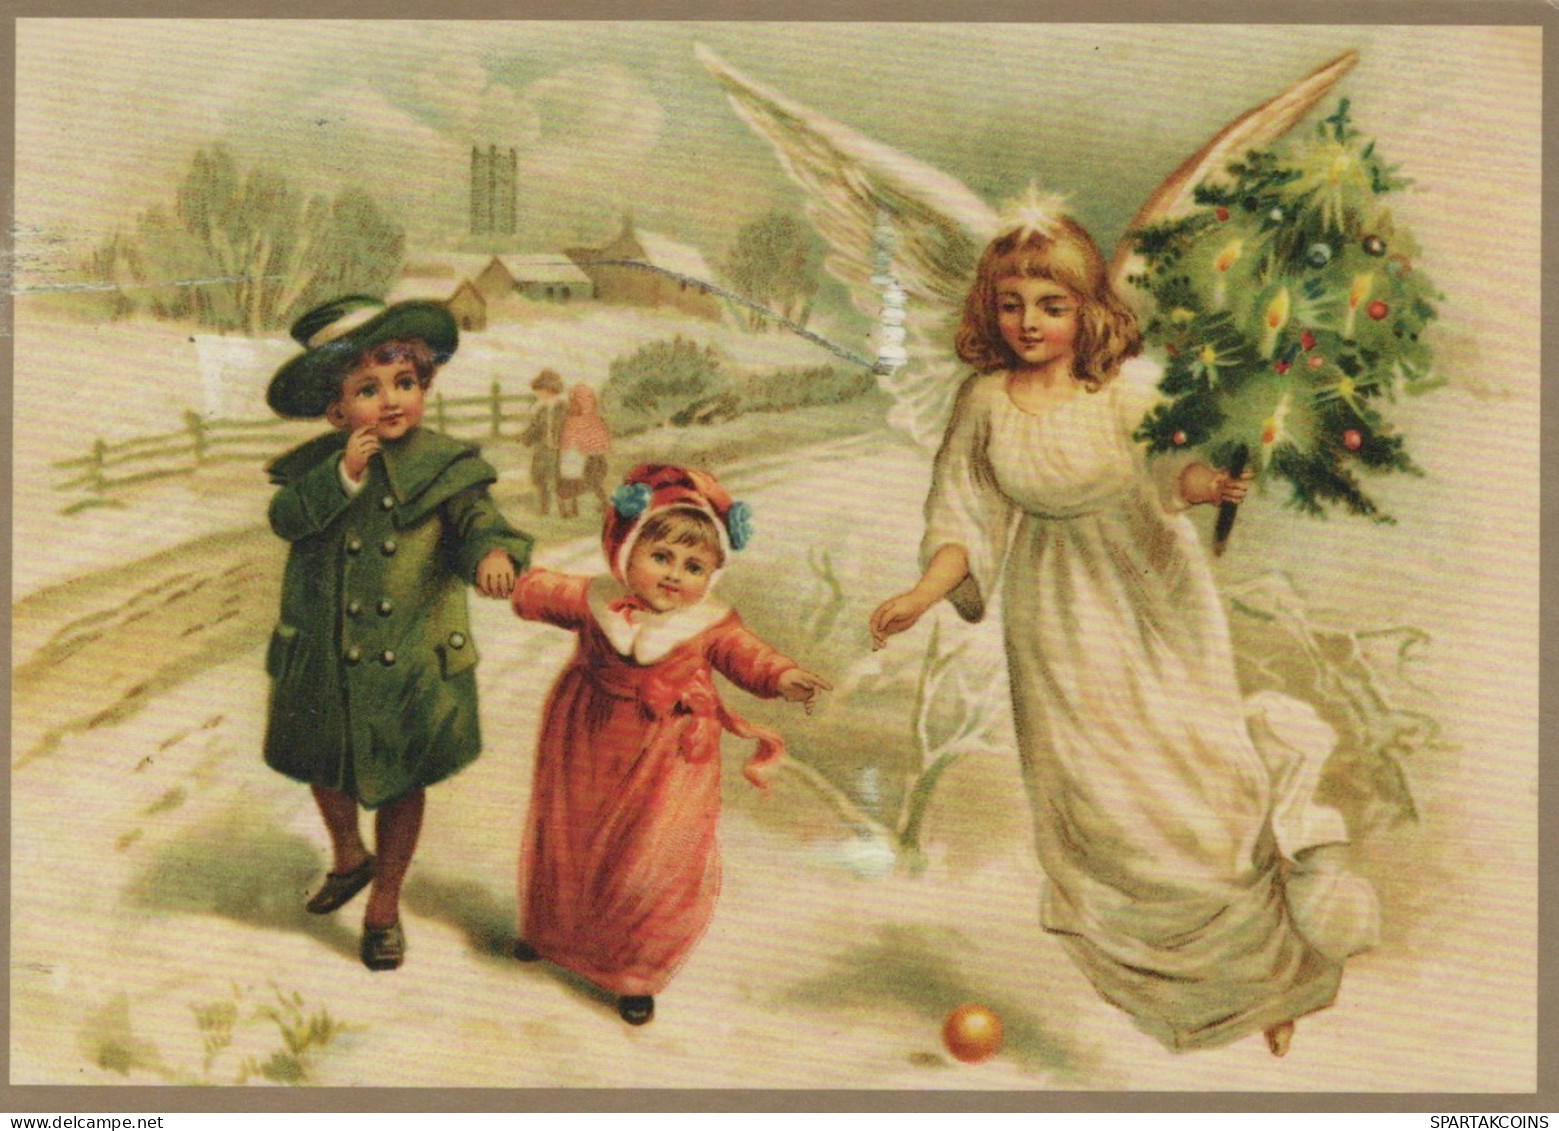 ANGELO Buon Anno Natale Vintage Cartolina CPSM #PAH494.IT - Angels